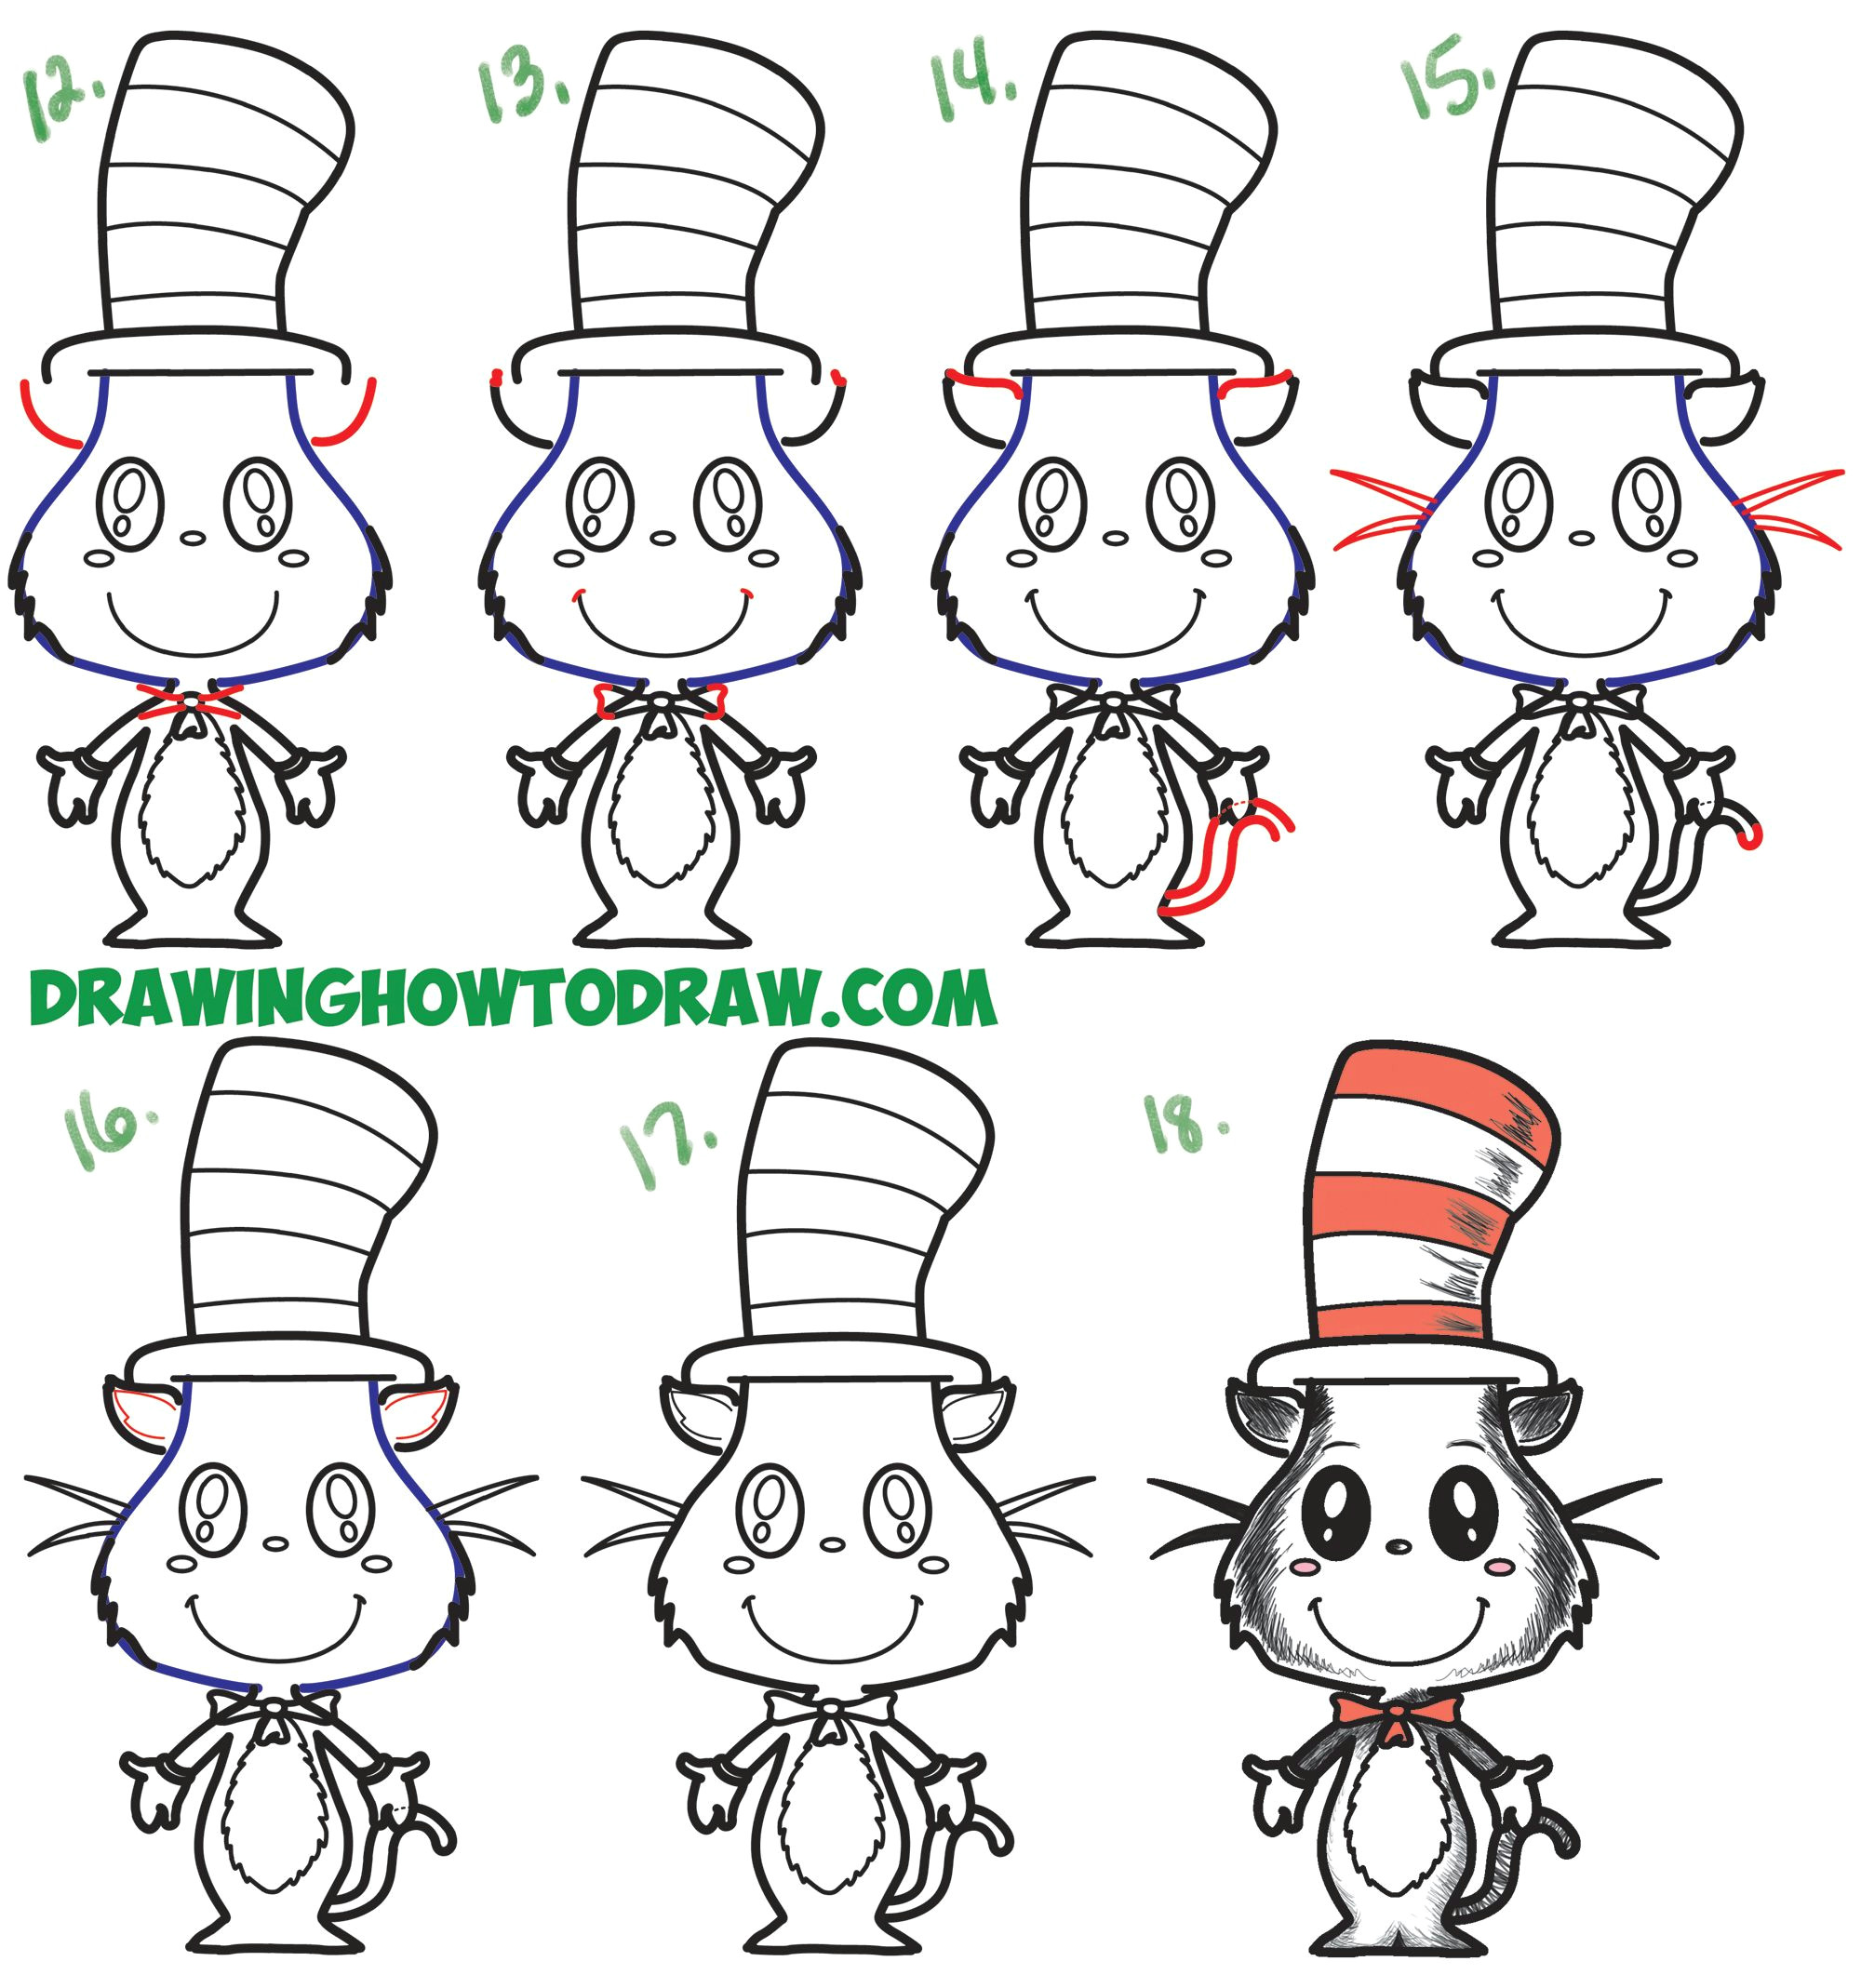 learn how to draw the cat in the hat cute kawaii chibi version simple steps drawing lesson for beginners